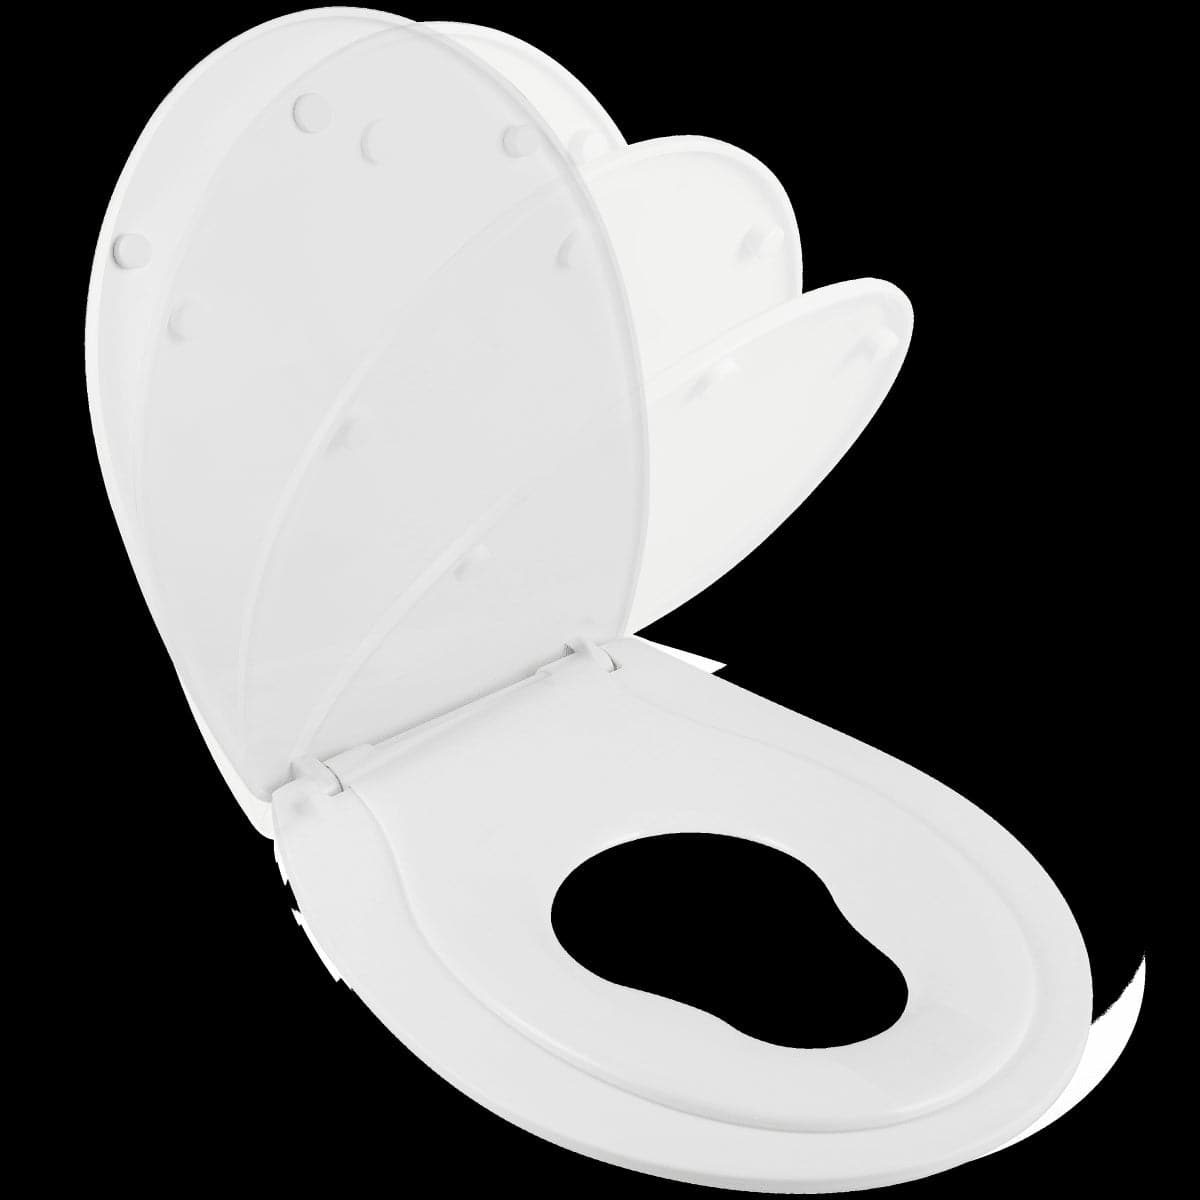 FAMILY WC SEAT OVAL WHITE - QUICK RELEASE - SLOW CLOSING - best price from Maltashopper.com BR430007089